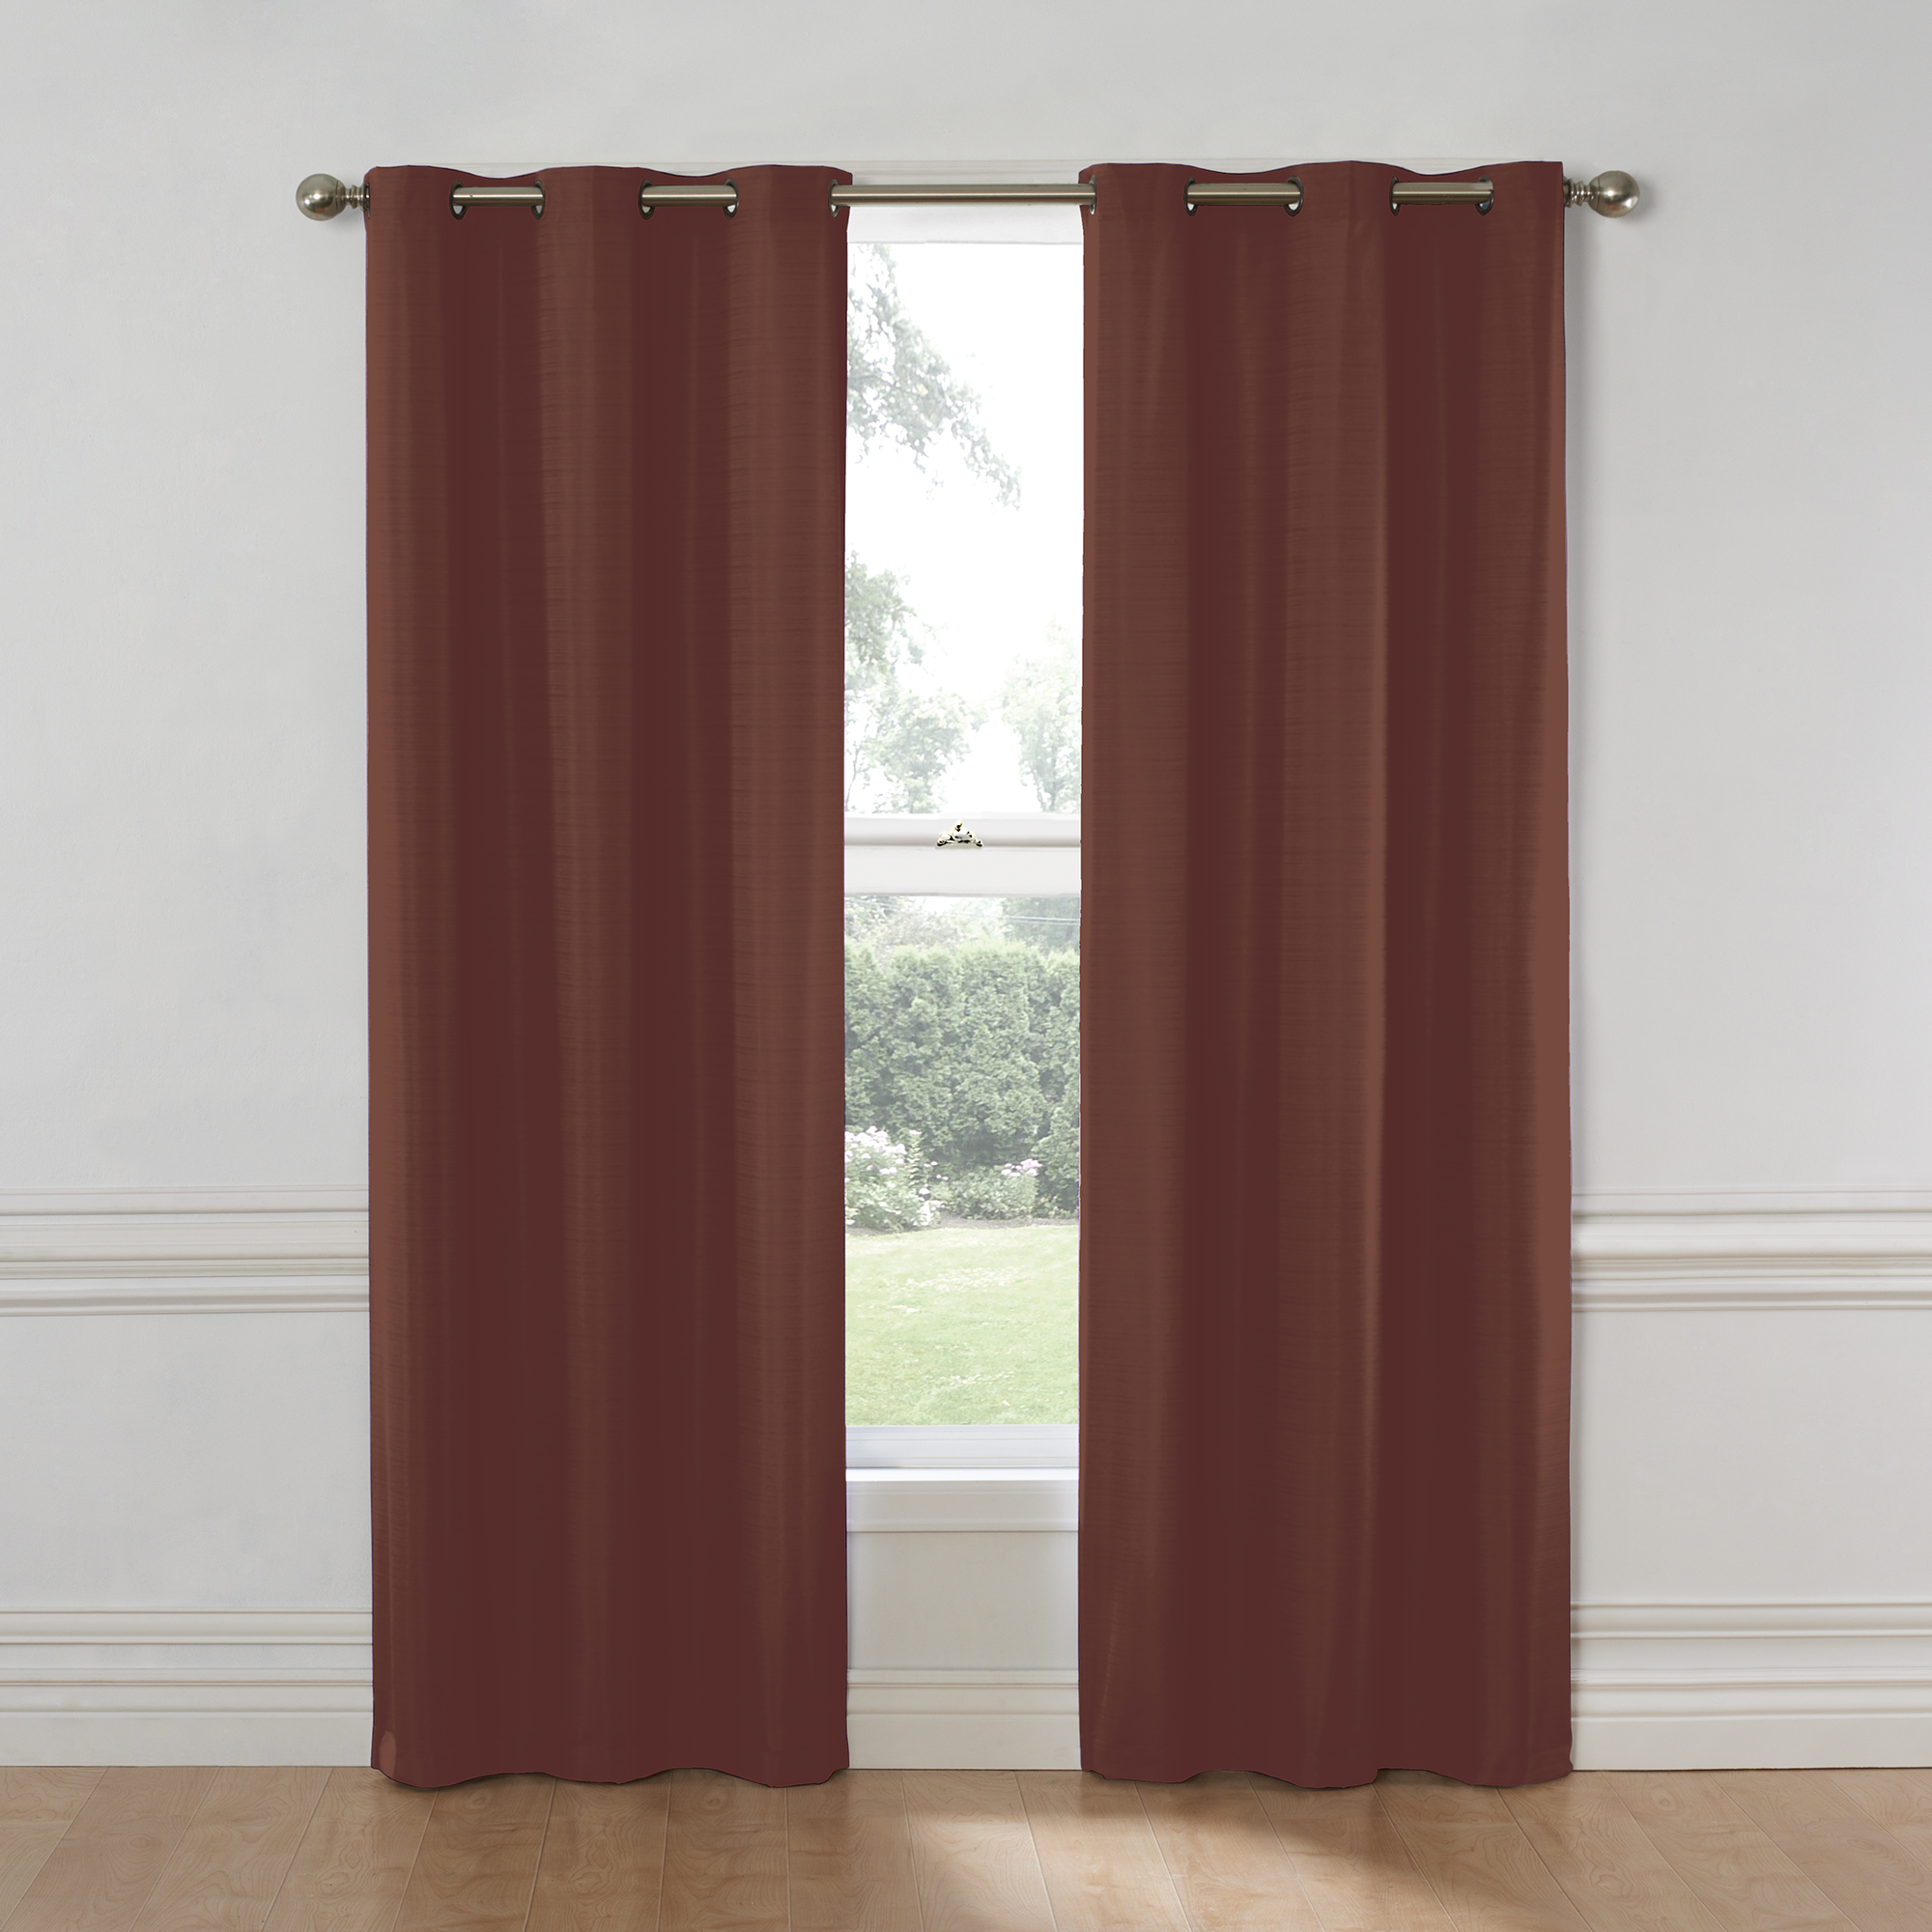 Eclipse Nottingham Blackout Grommet Top Single Curtain Panel, Red, 40 x 95 - image 3 of 3